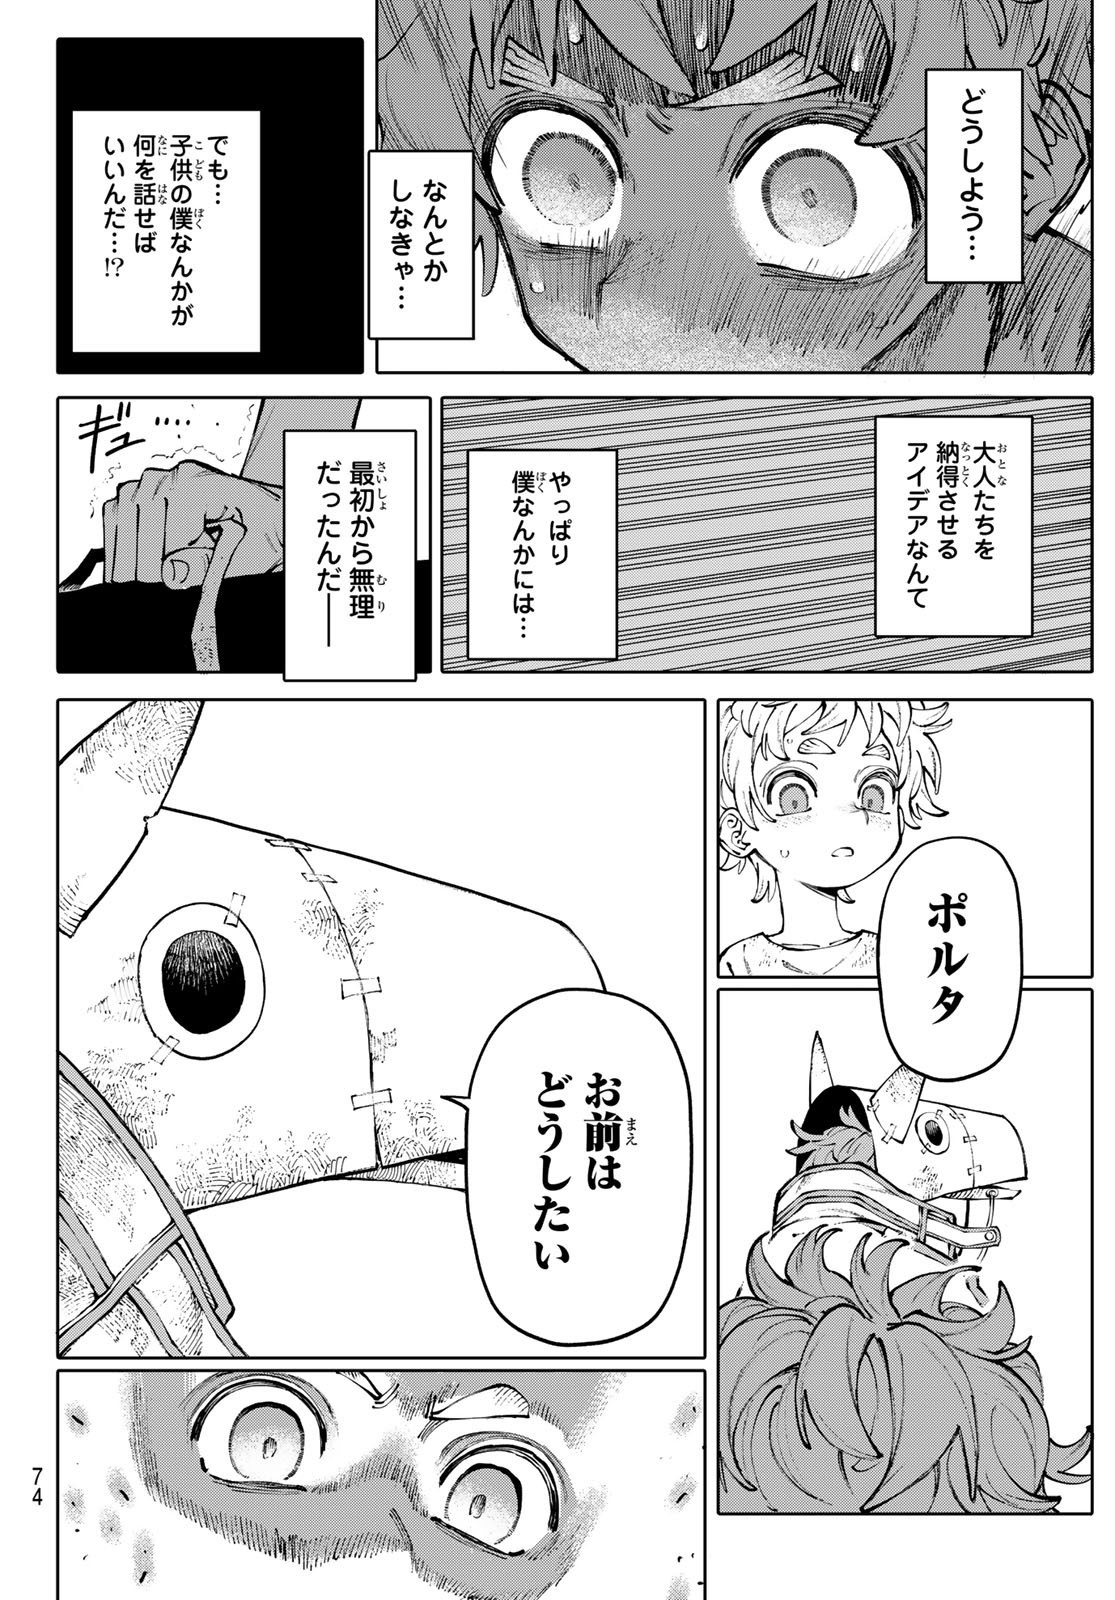 Weekly Shōnen Magazine - 週刊少年マガジン - Chapter 2024-34 - Page 71